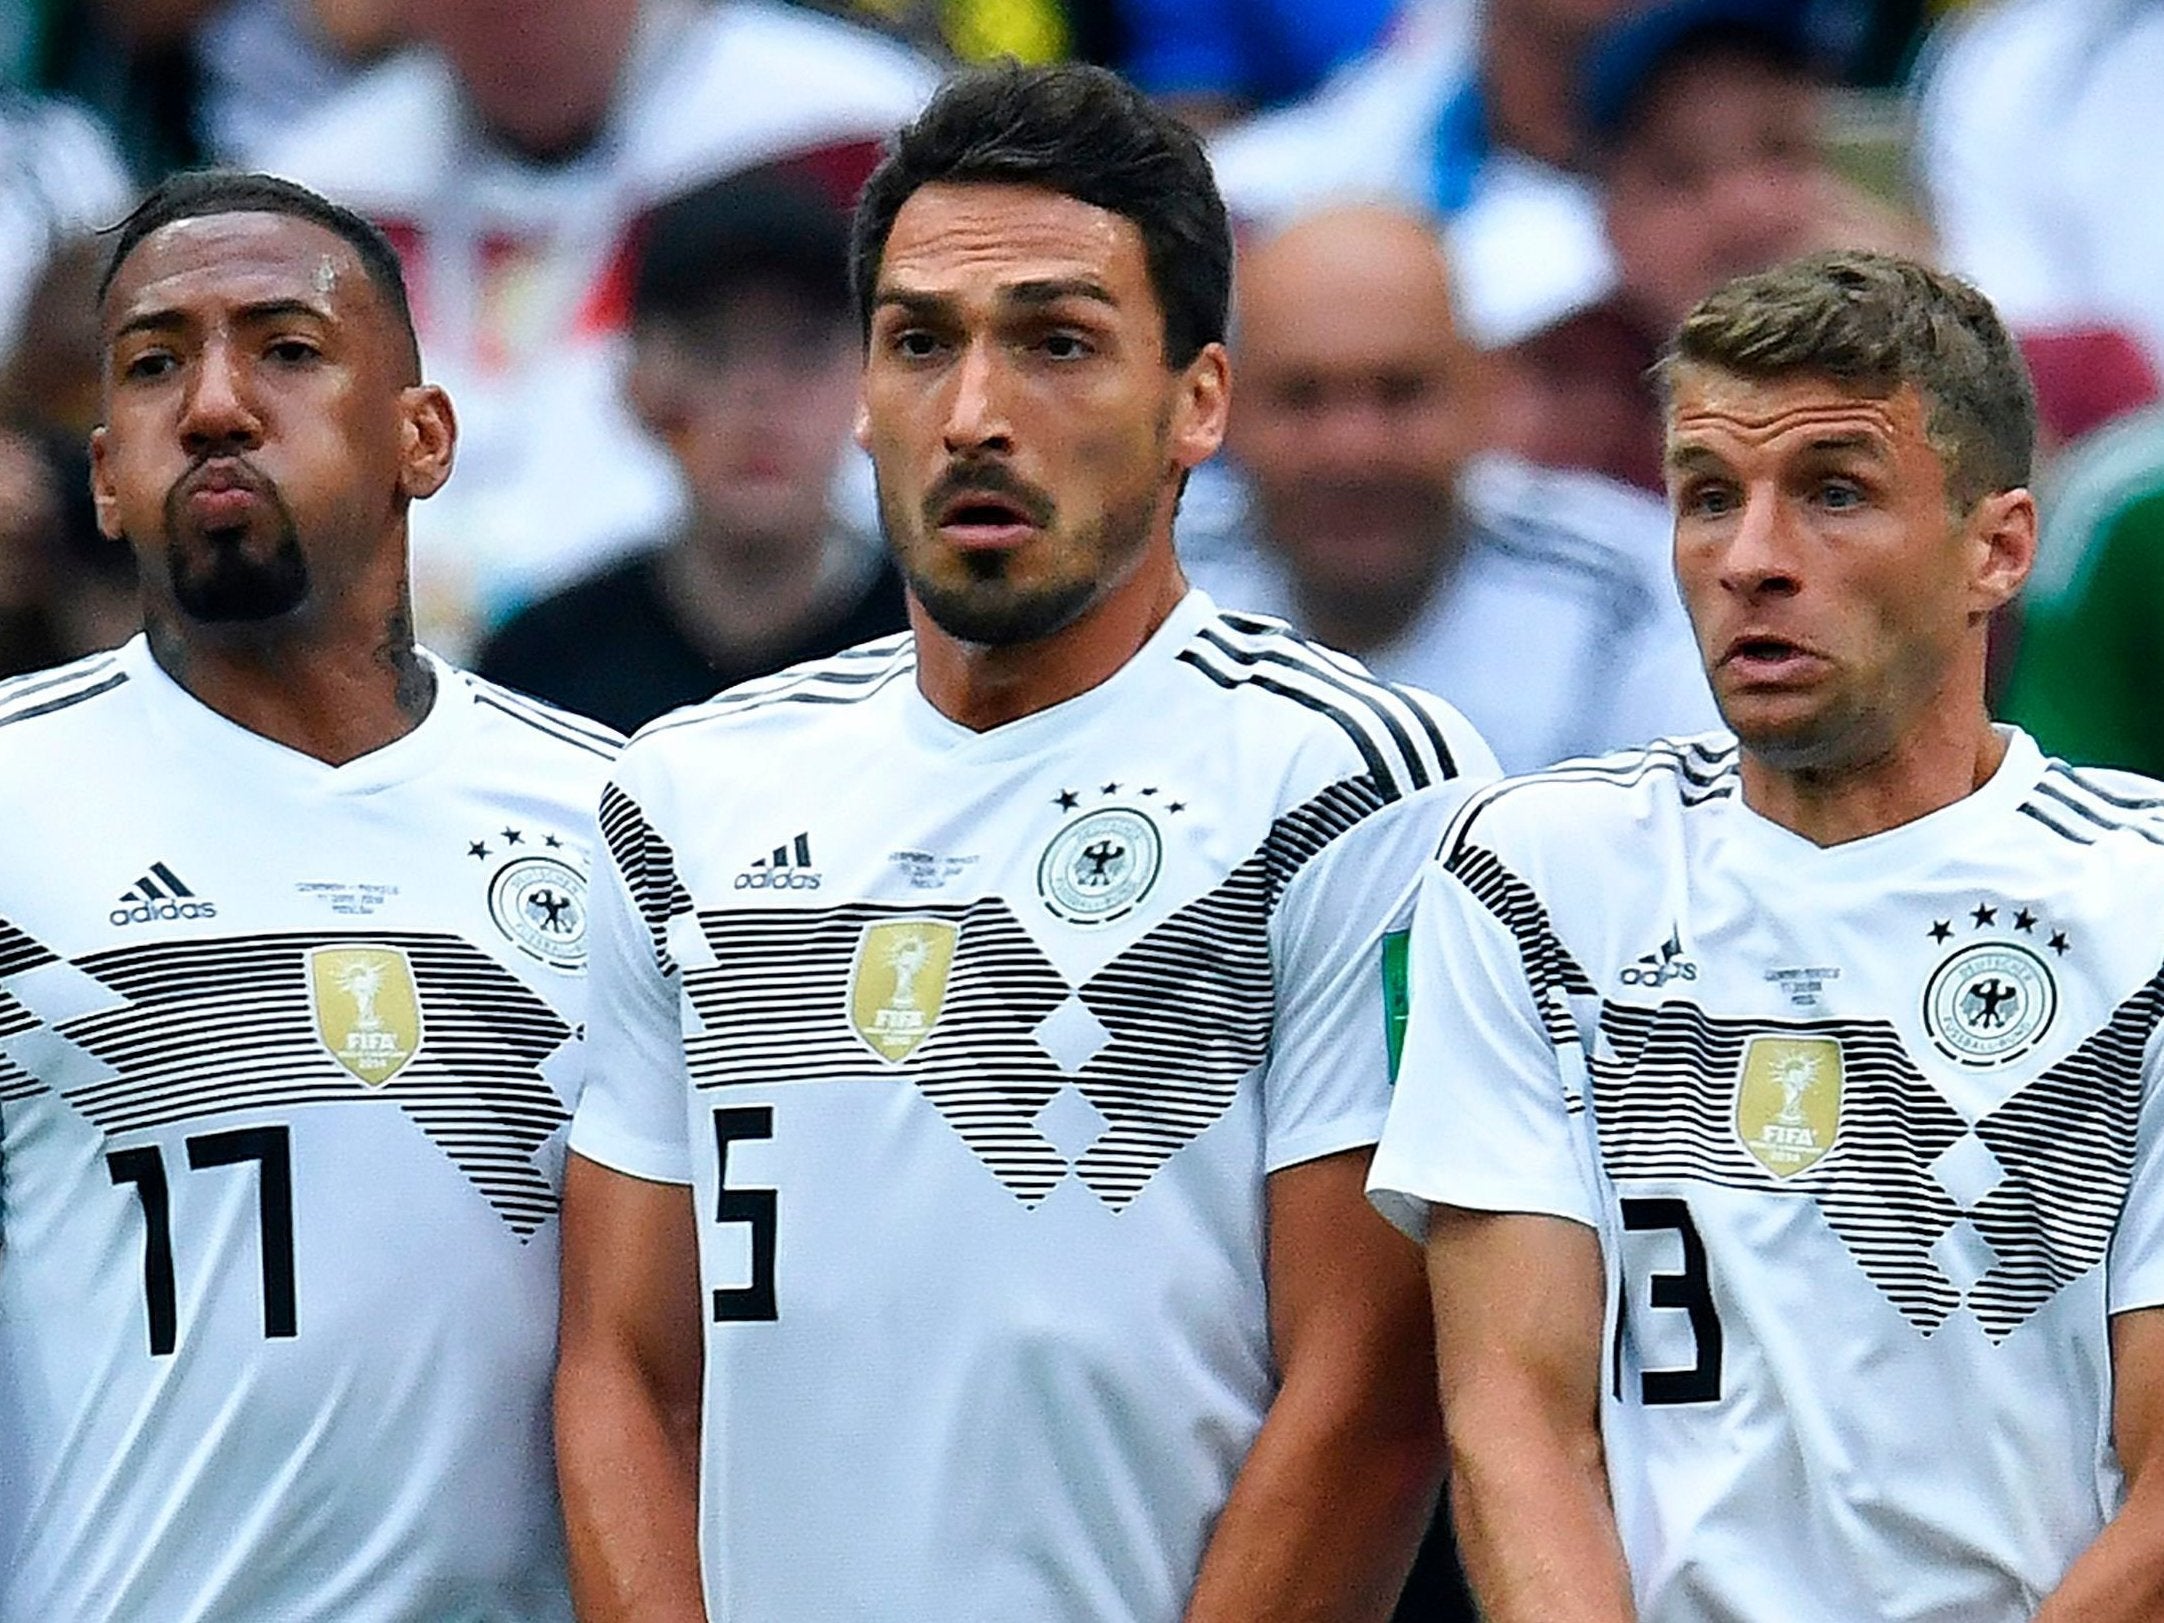 Jerome Boateng, Mats Hummels and Thomas Muller have been exiled